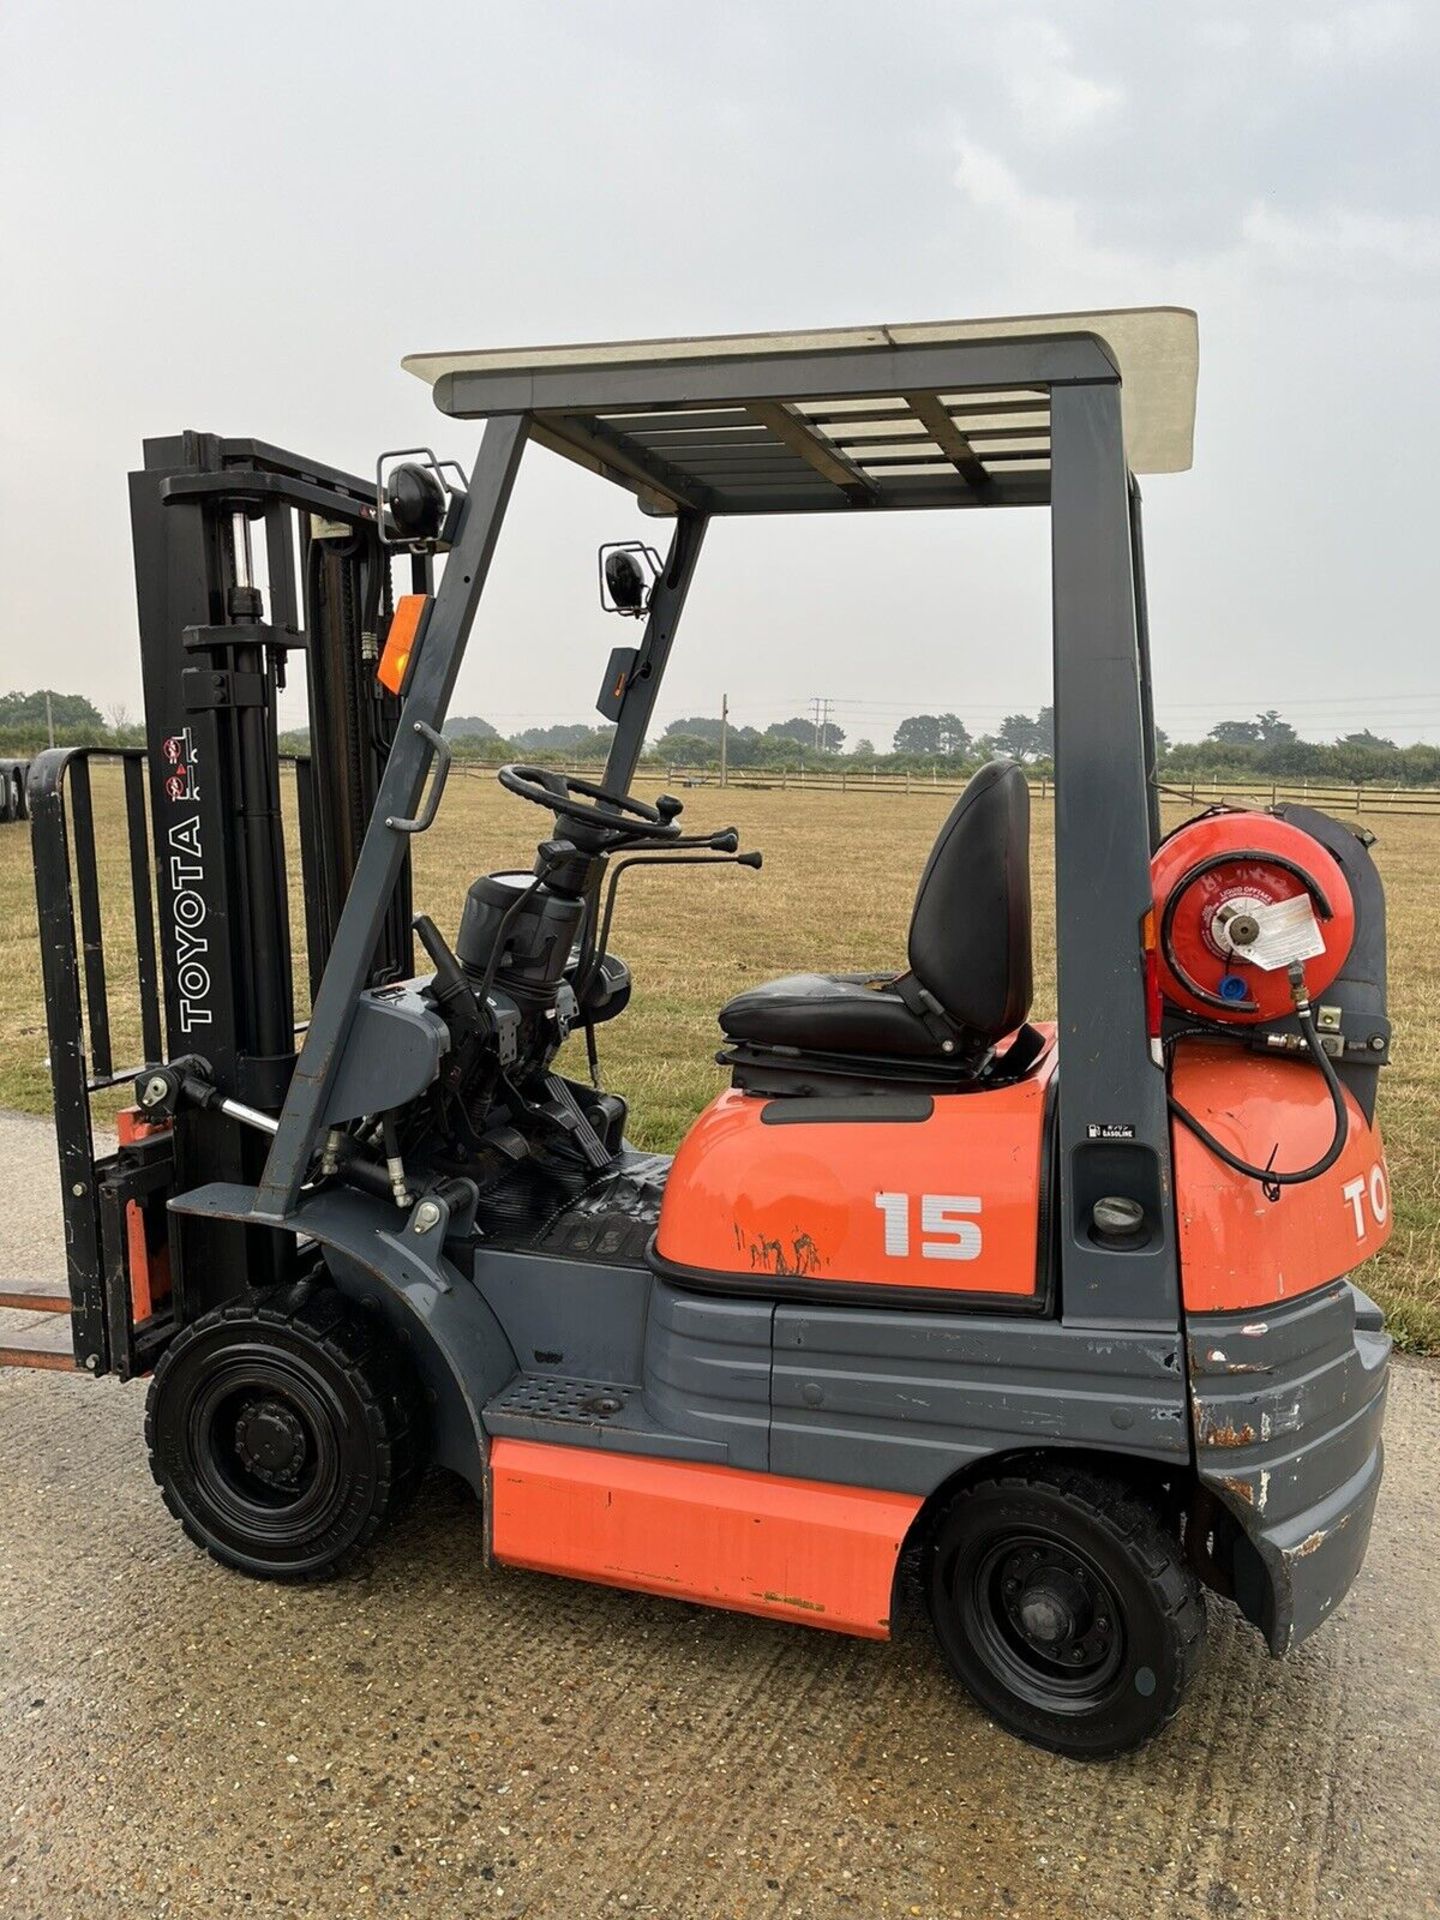 Toyota 1.5 Tonne Gas Forklift Truck - Image 4 of 4